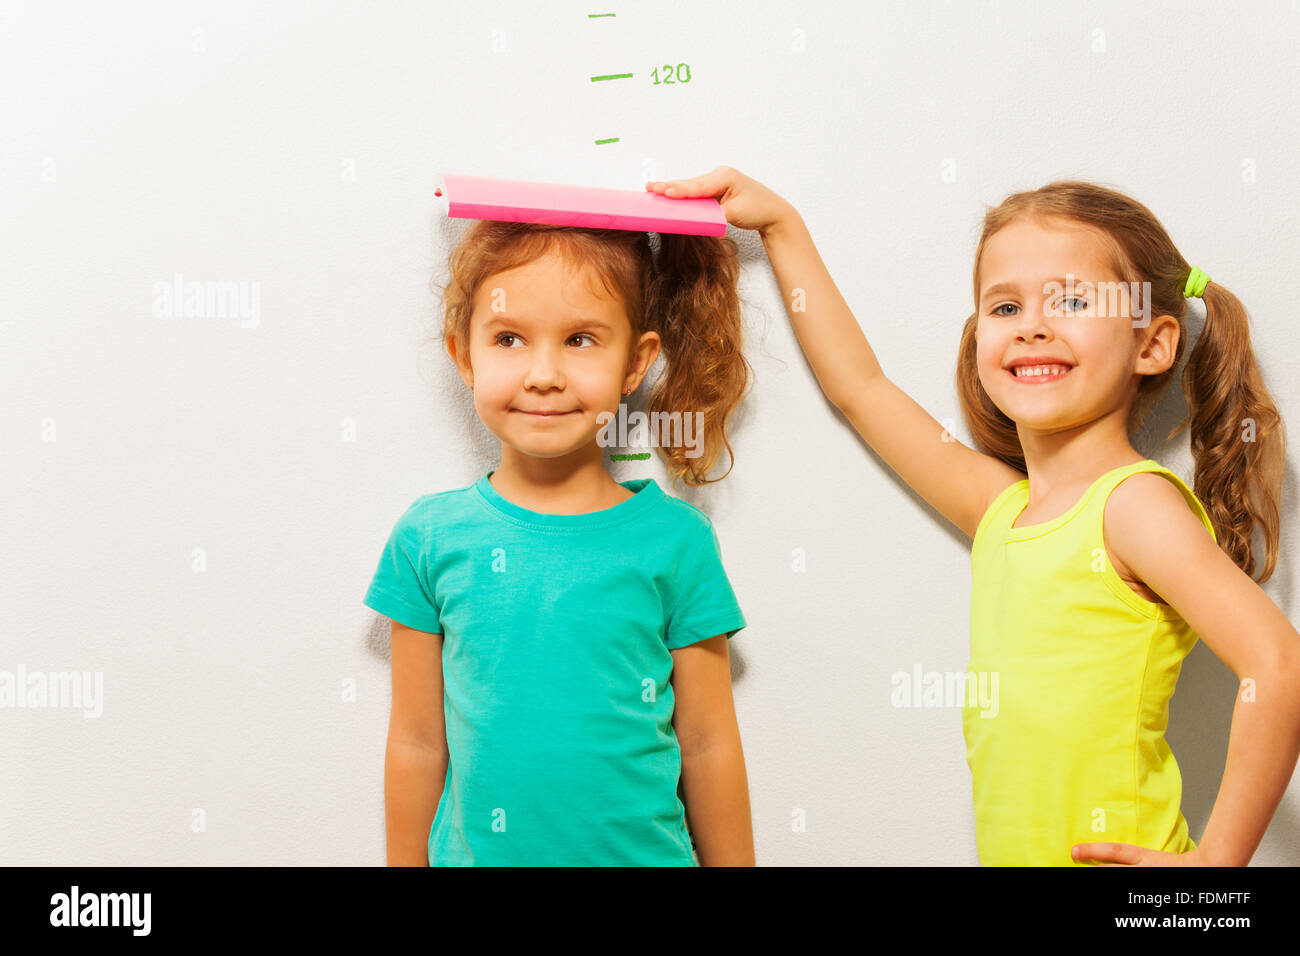 Girls measure height on wall scale Stock Photo